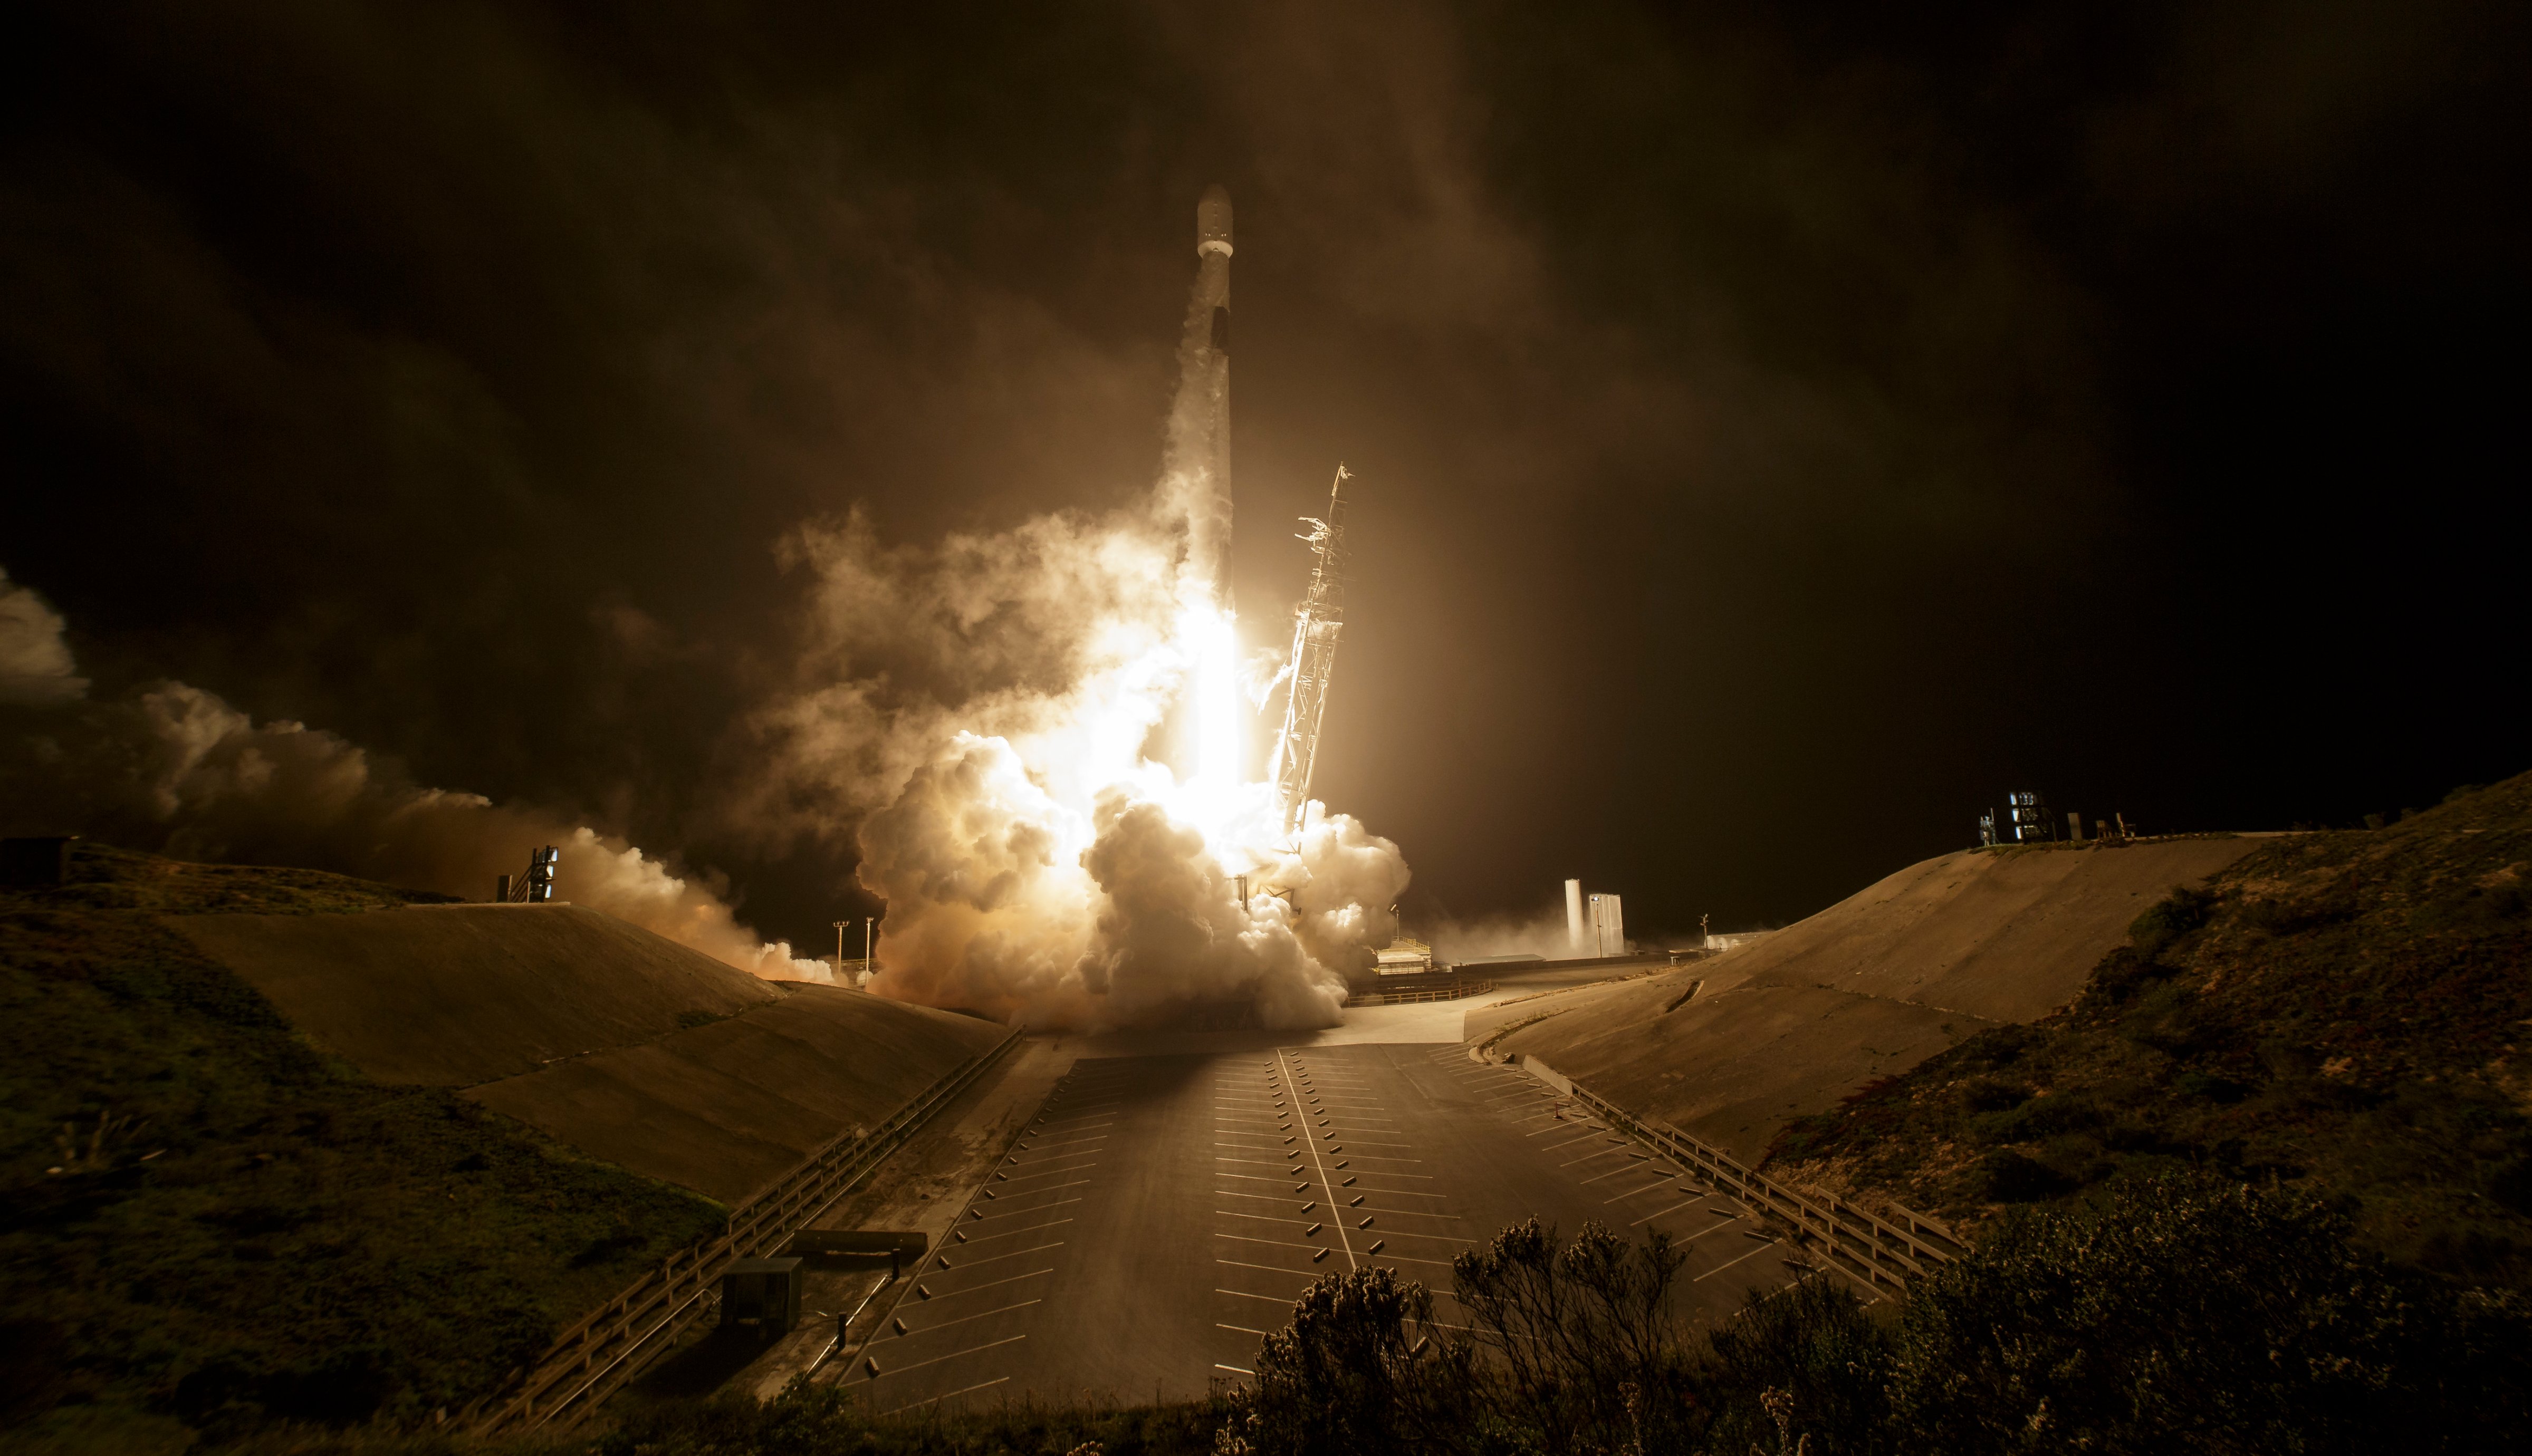 The SpaceX Falcon 9 rocket launches with the Double Asteroid Redirection Test, or DART, spacecraft onboard, Tuesday, Nov. 23, 2021 (NASA/Bill Ingalls)